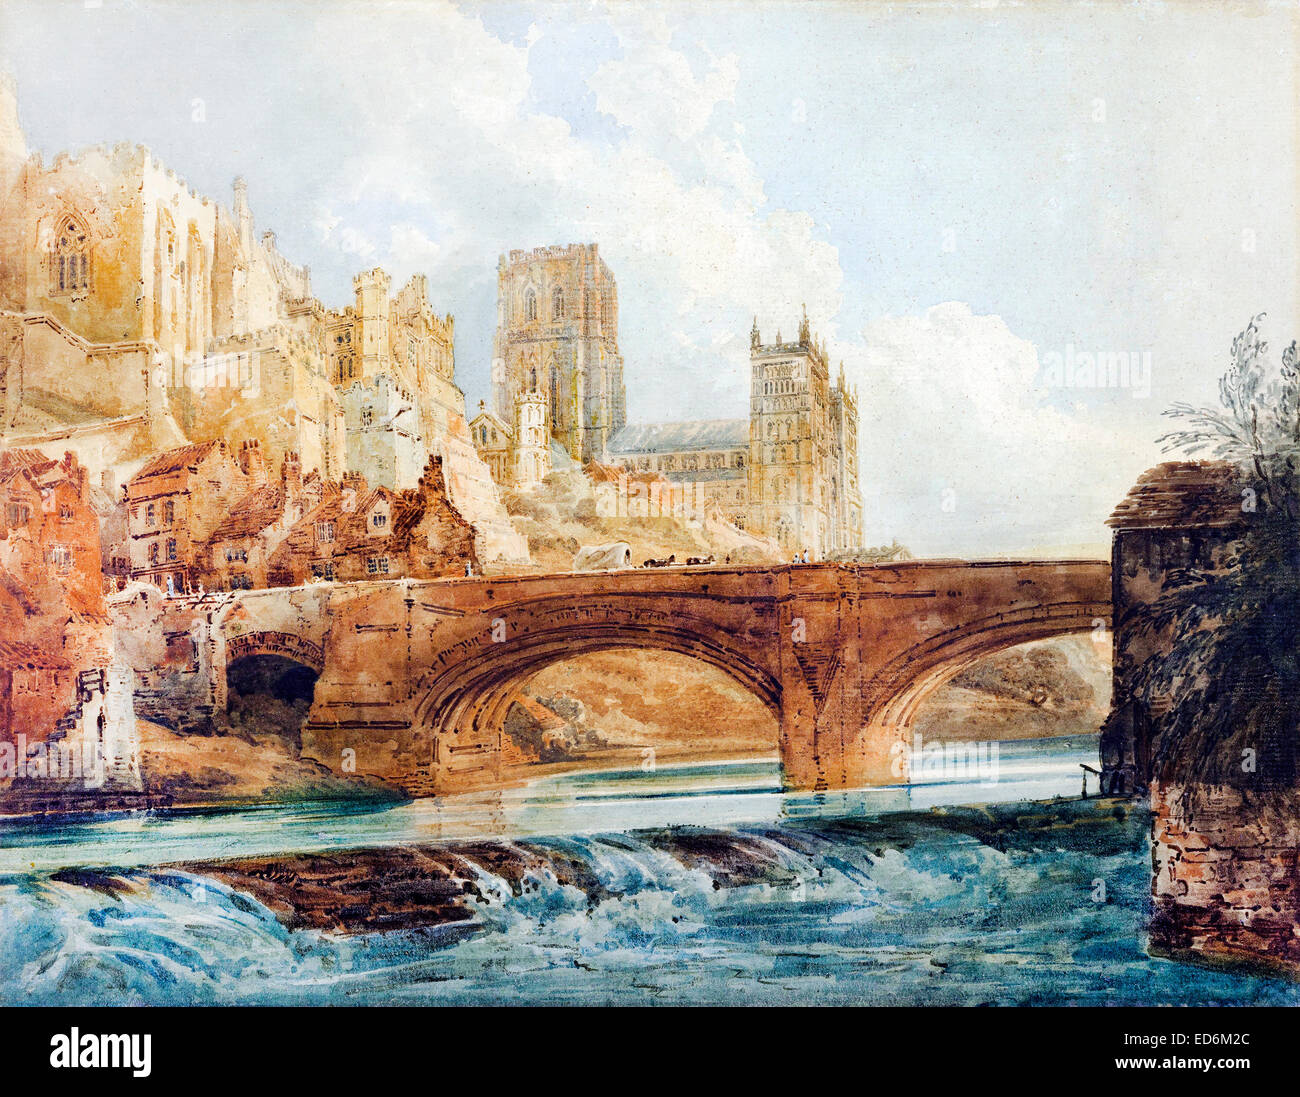 Thomas Girtin, Durham Cathedral and Castle. Circa 1800. Watercolor. J. Paul Getty Museum, Los Angeles, USA. Stock Photo